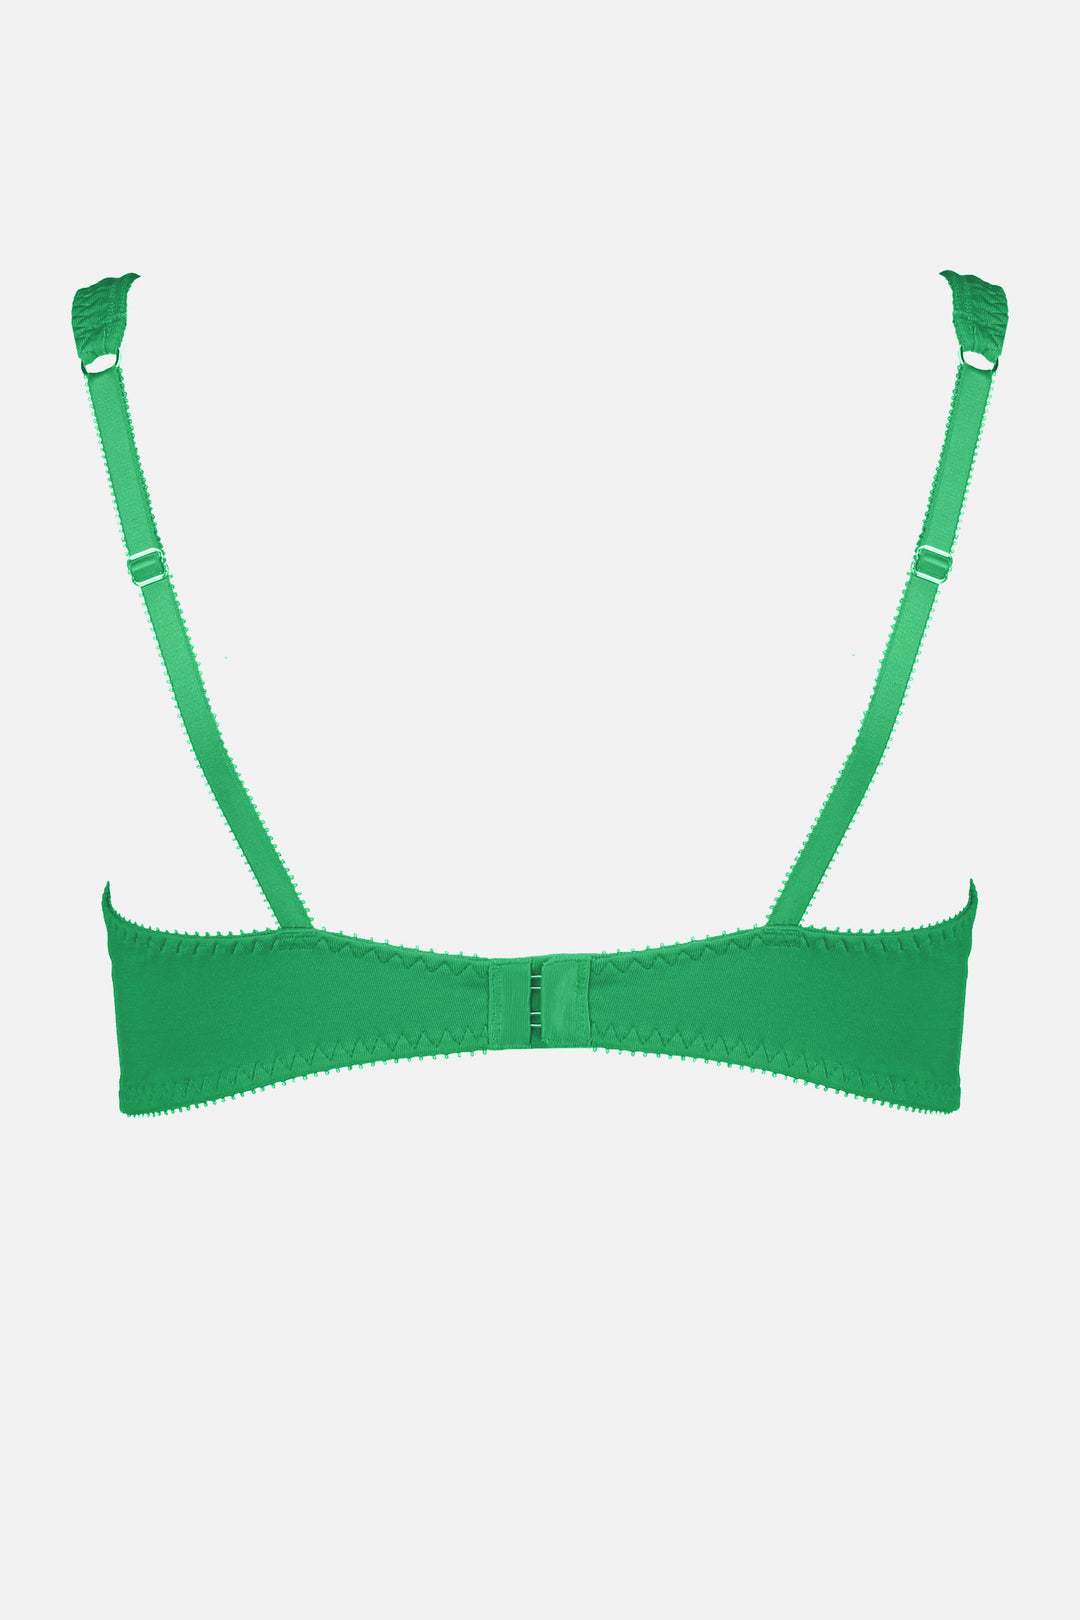 Videris Lingerie Sarah underwire free soft cup bra in green TENCEL™ features adjustable back straps and hook and eyes closure